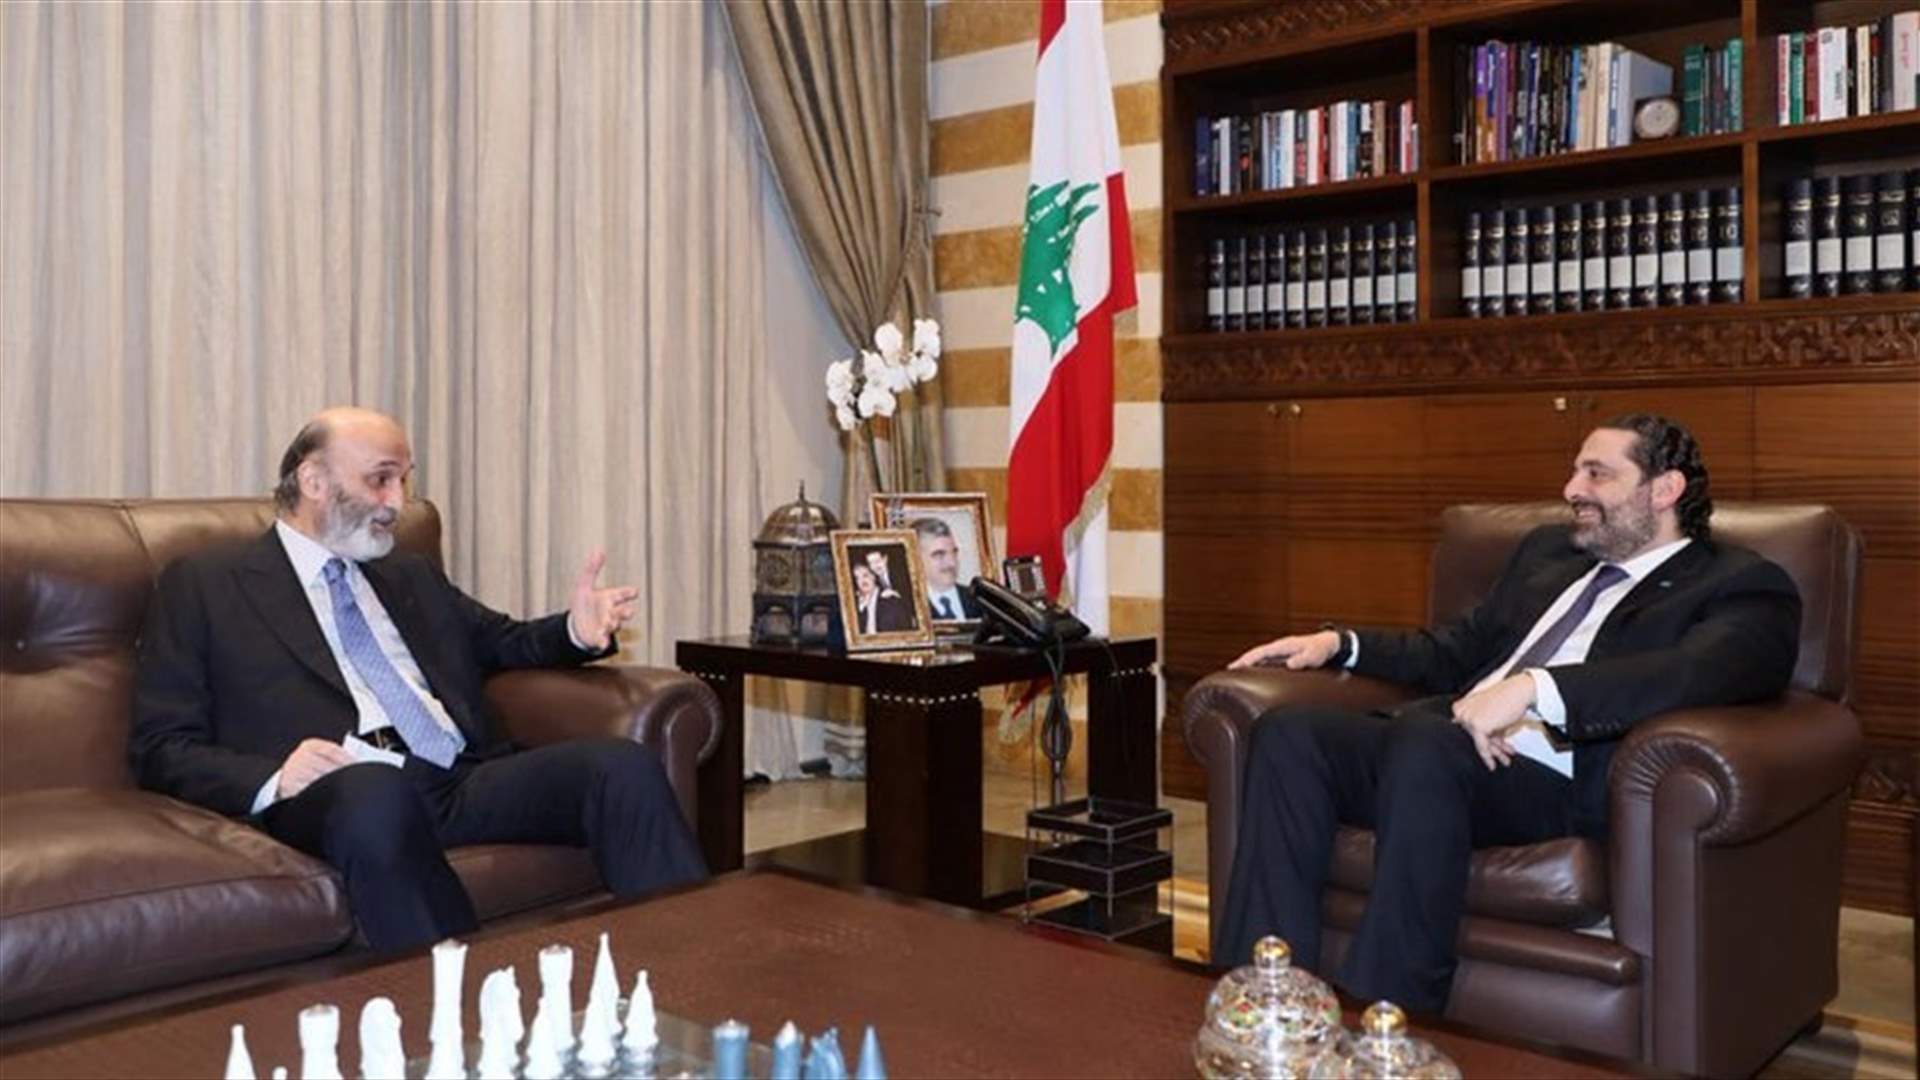 Hariri meets with Geagea at Beit al-Wasat, tackled political situation (Photos)